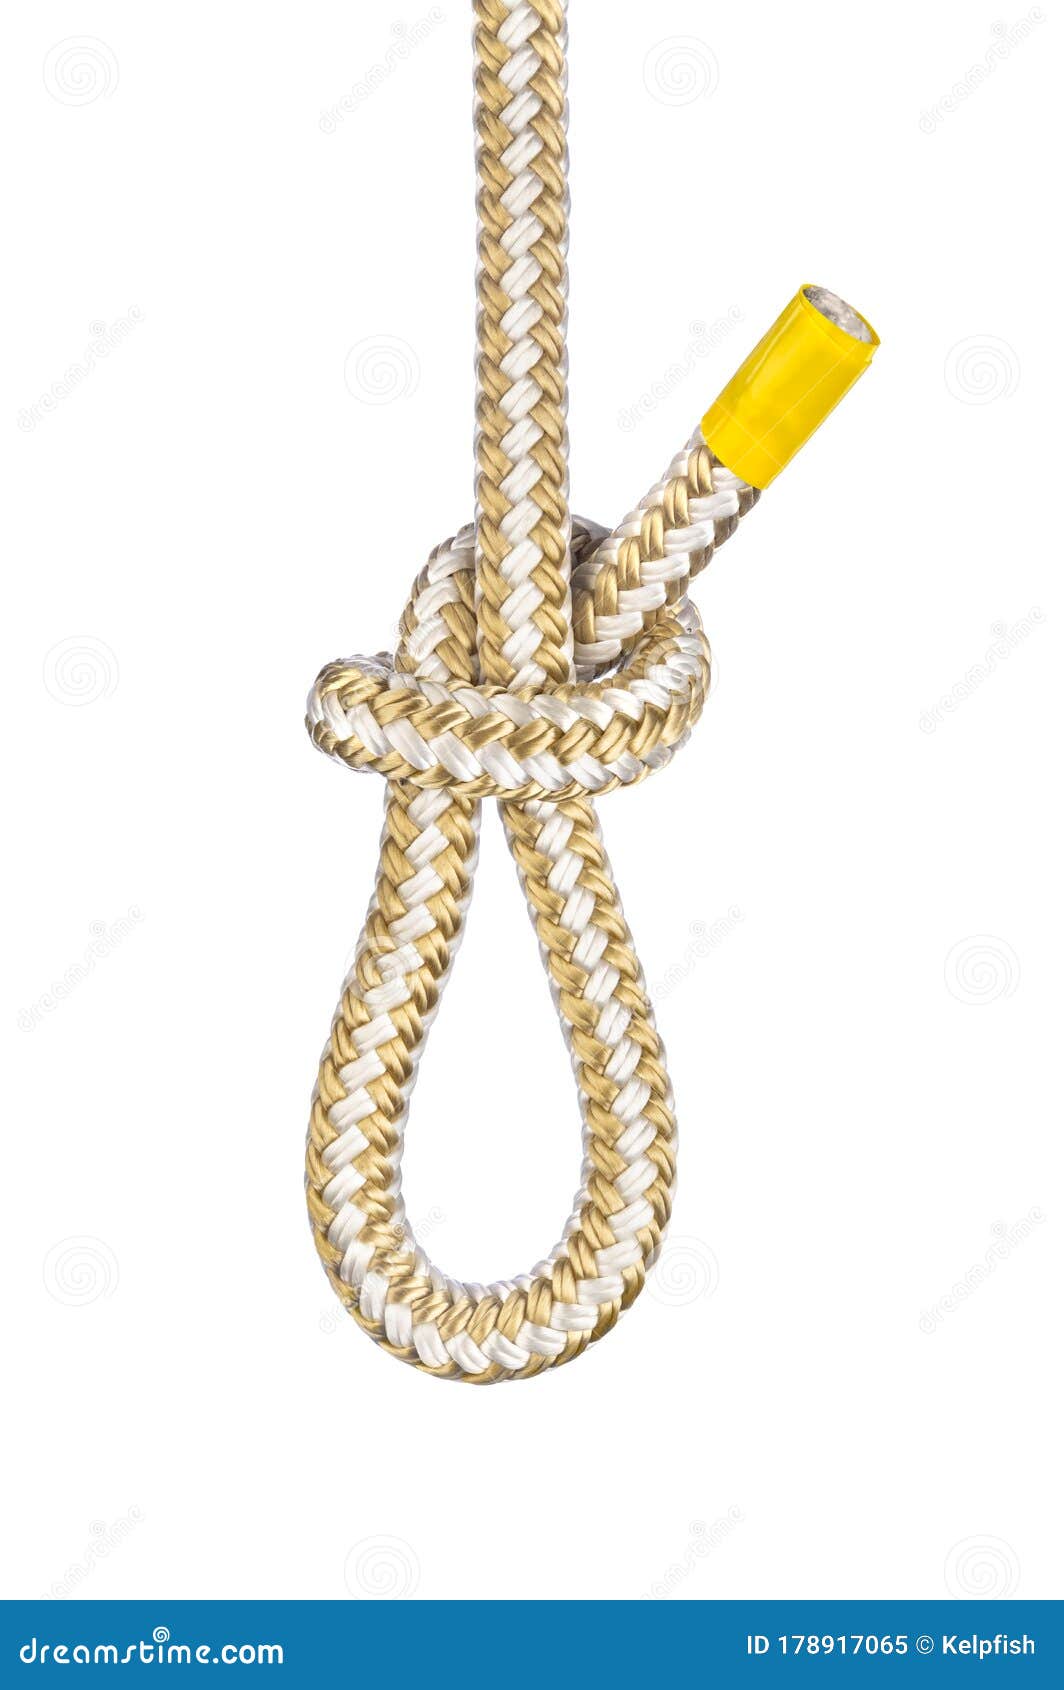 Noose knot on white stock image. Image of secure, rigging - 178917065